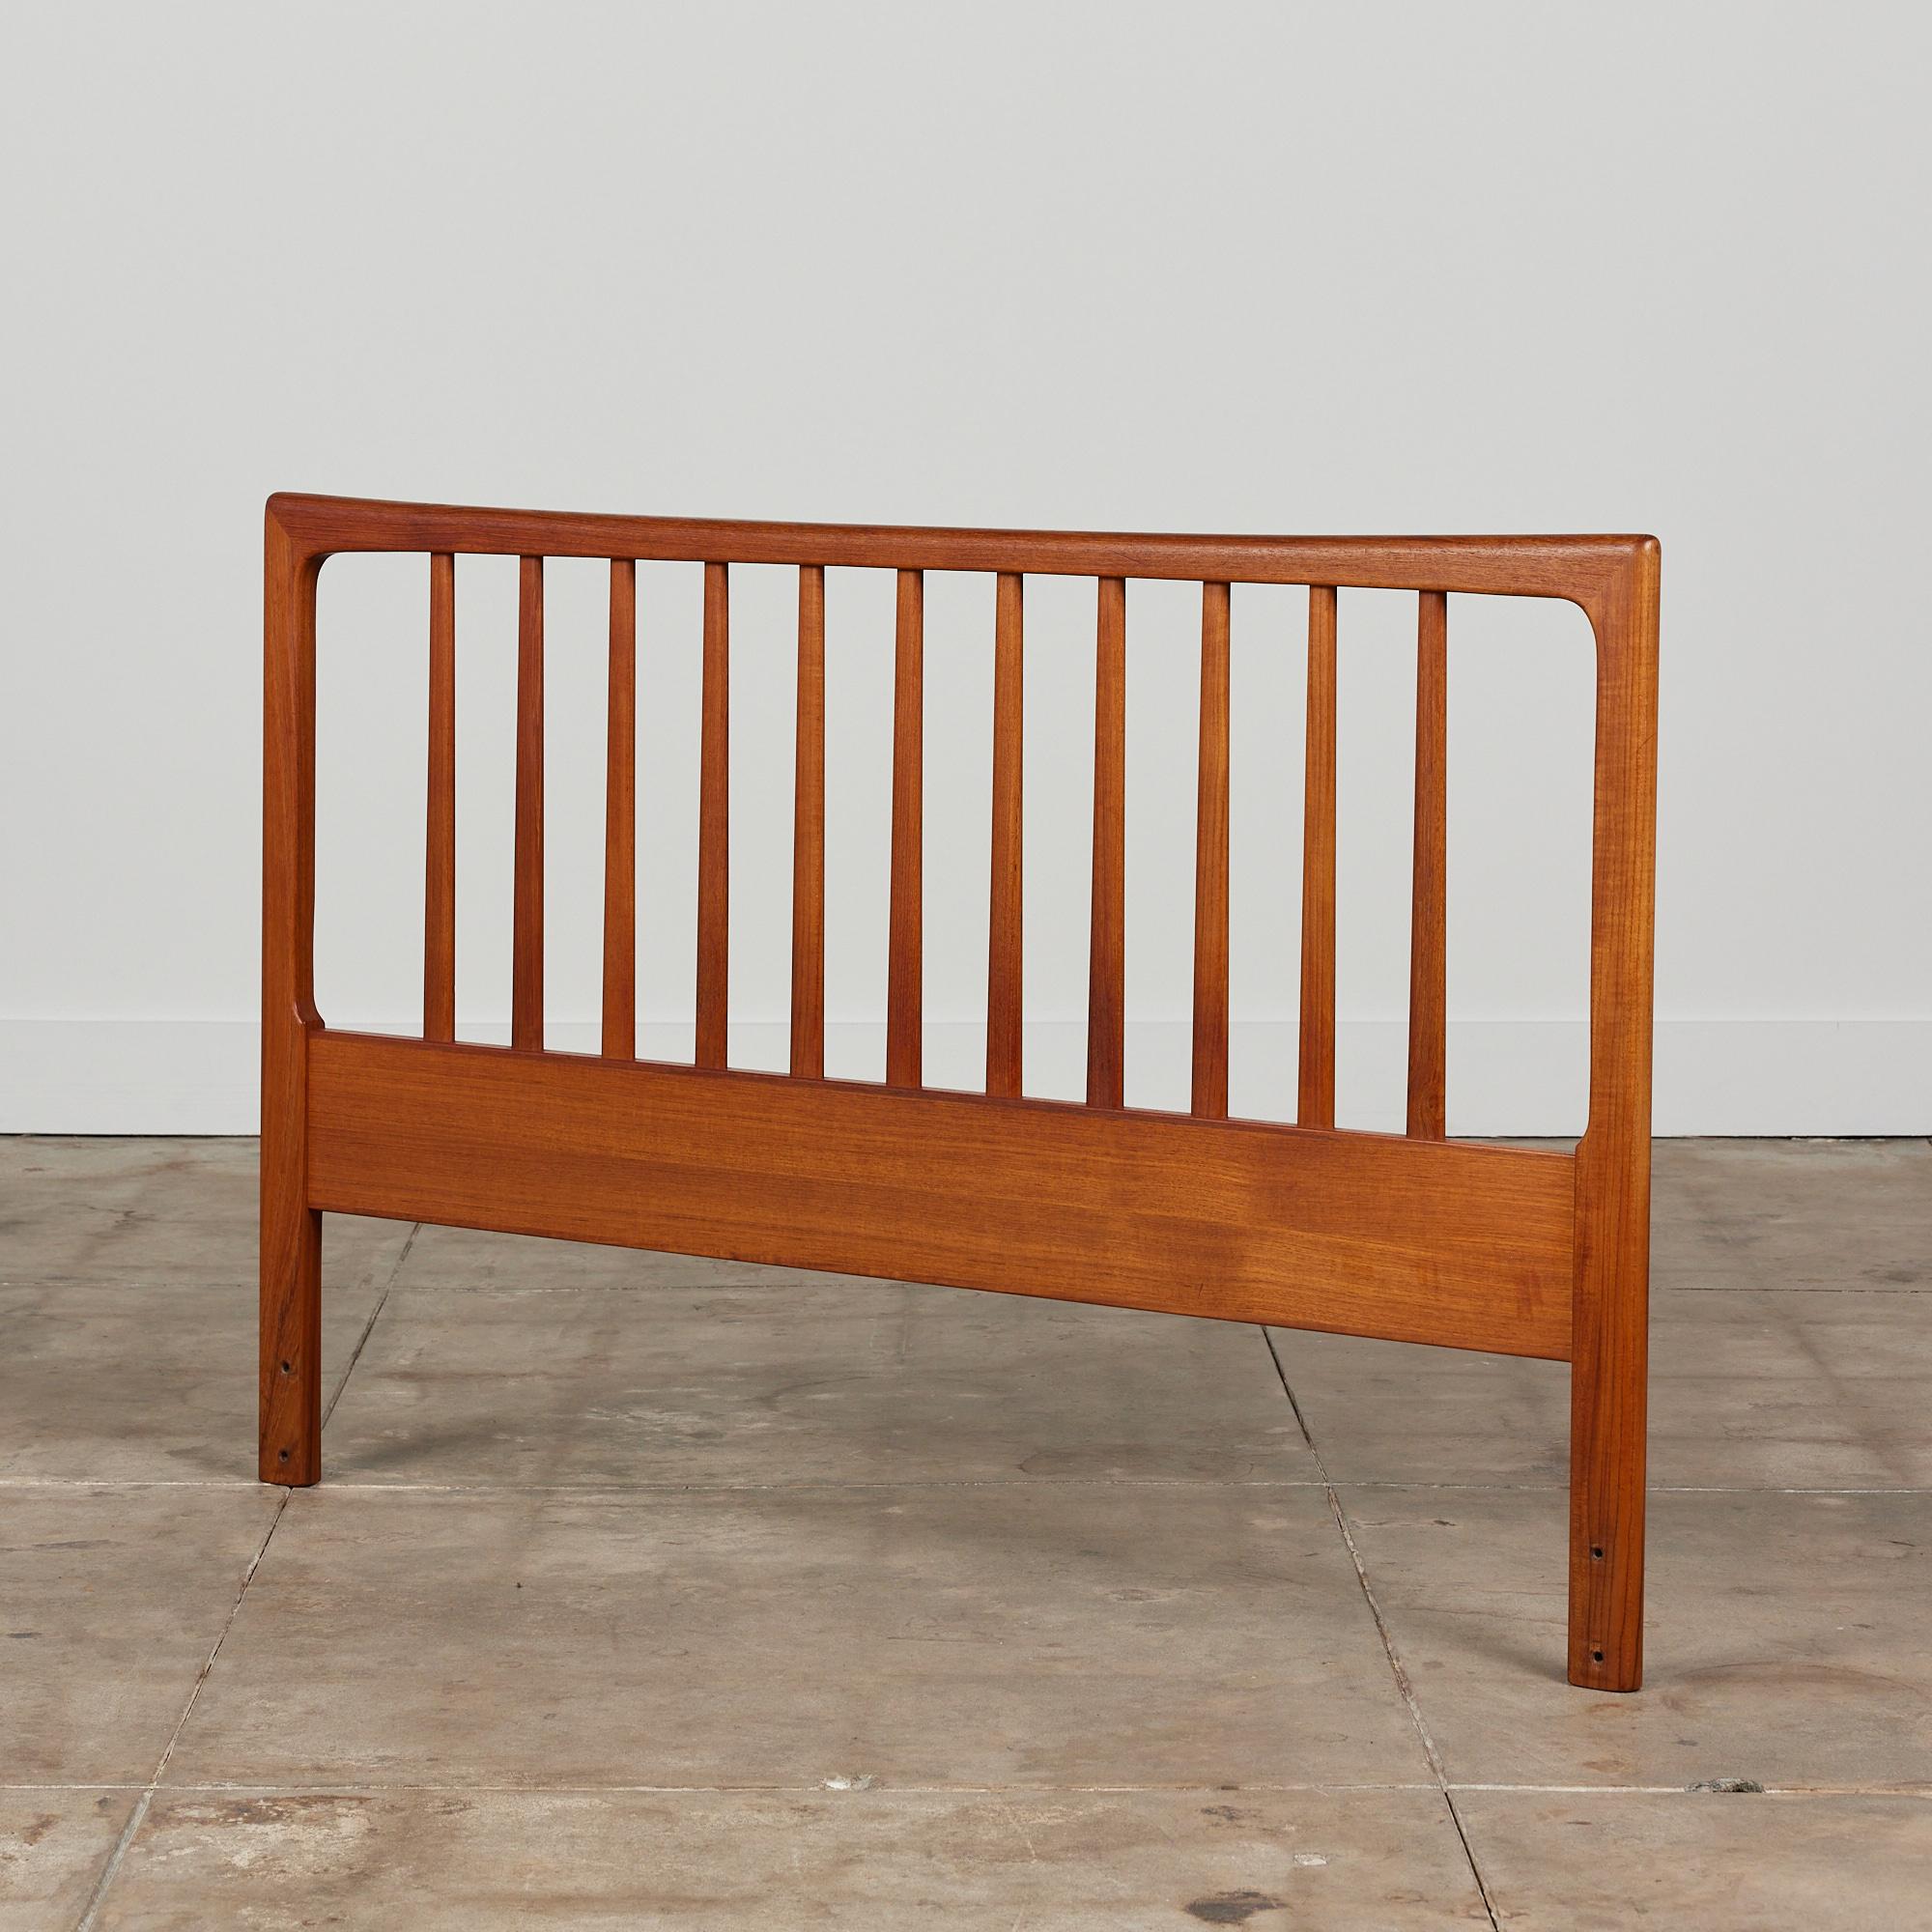 Teak headboard by Folke Ohlsson, circa.1960s for DUX of Sweden. This piece made from solid teak features a spindle detail and soft rounded corners.

Dimensions
54